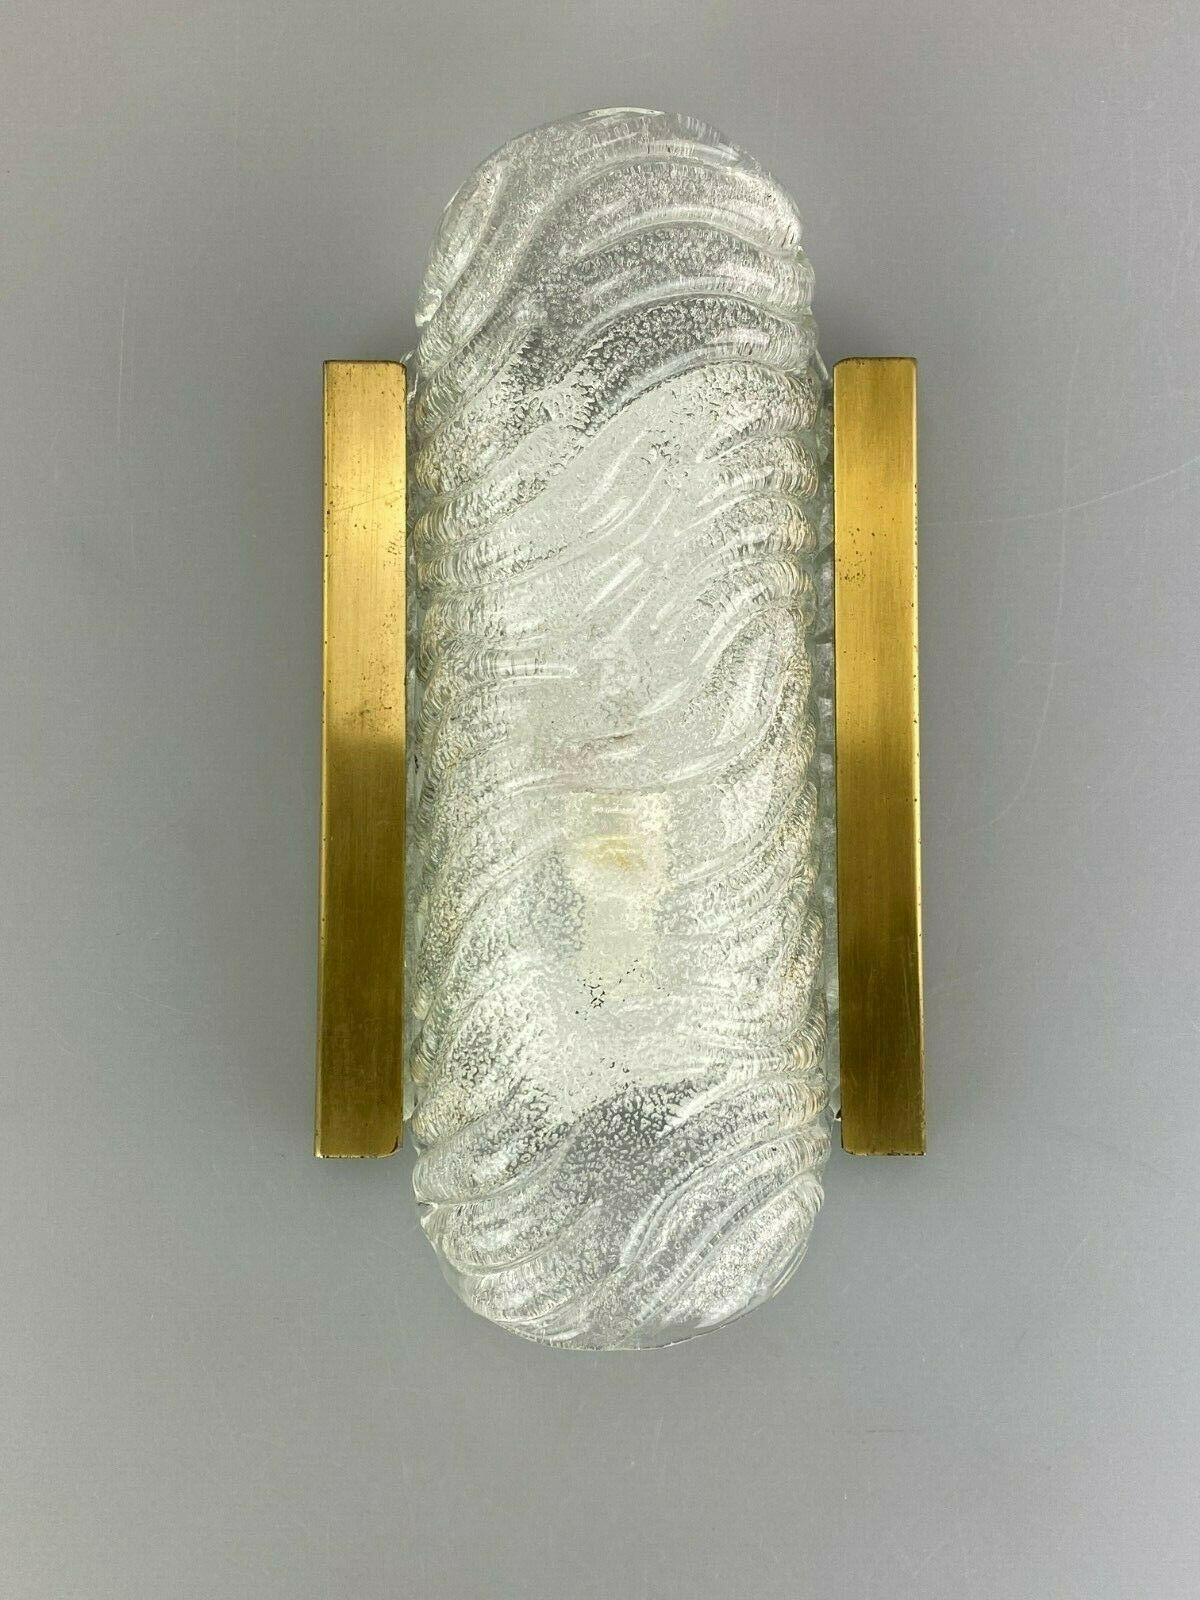 60s 70s Lamp Fixture Wall Lamp Wall Scone Ice Glass Space Age Design

Object: wall lamp

Manufacturer: Fischer lights

Condition: good

Age: around 1960-1970

Dimensions:

29cm x 15.5cm x 6.5cm

Other notes:

The pictures serve as